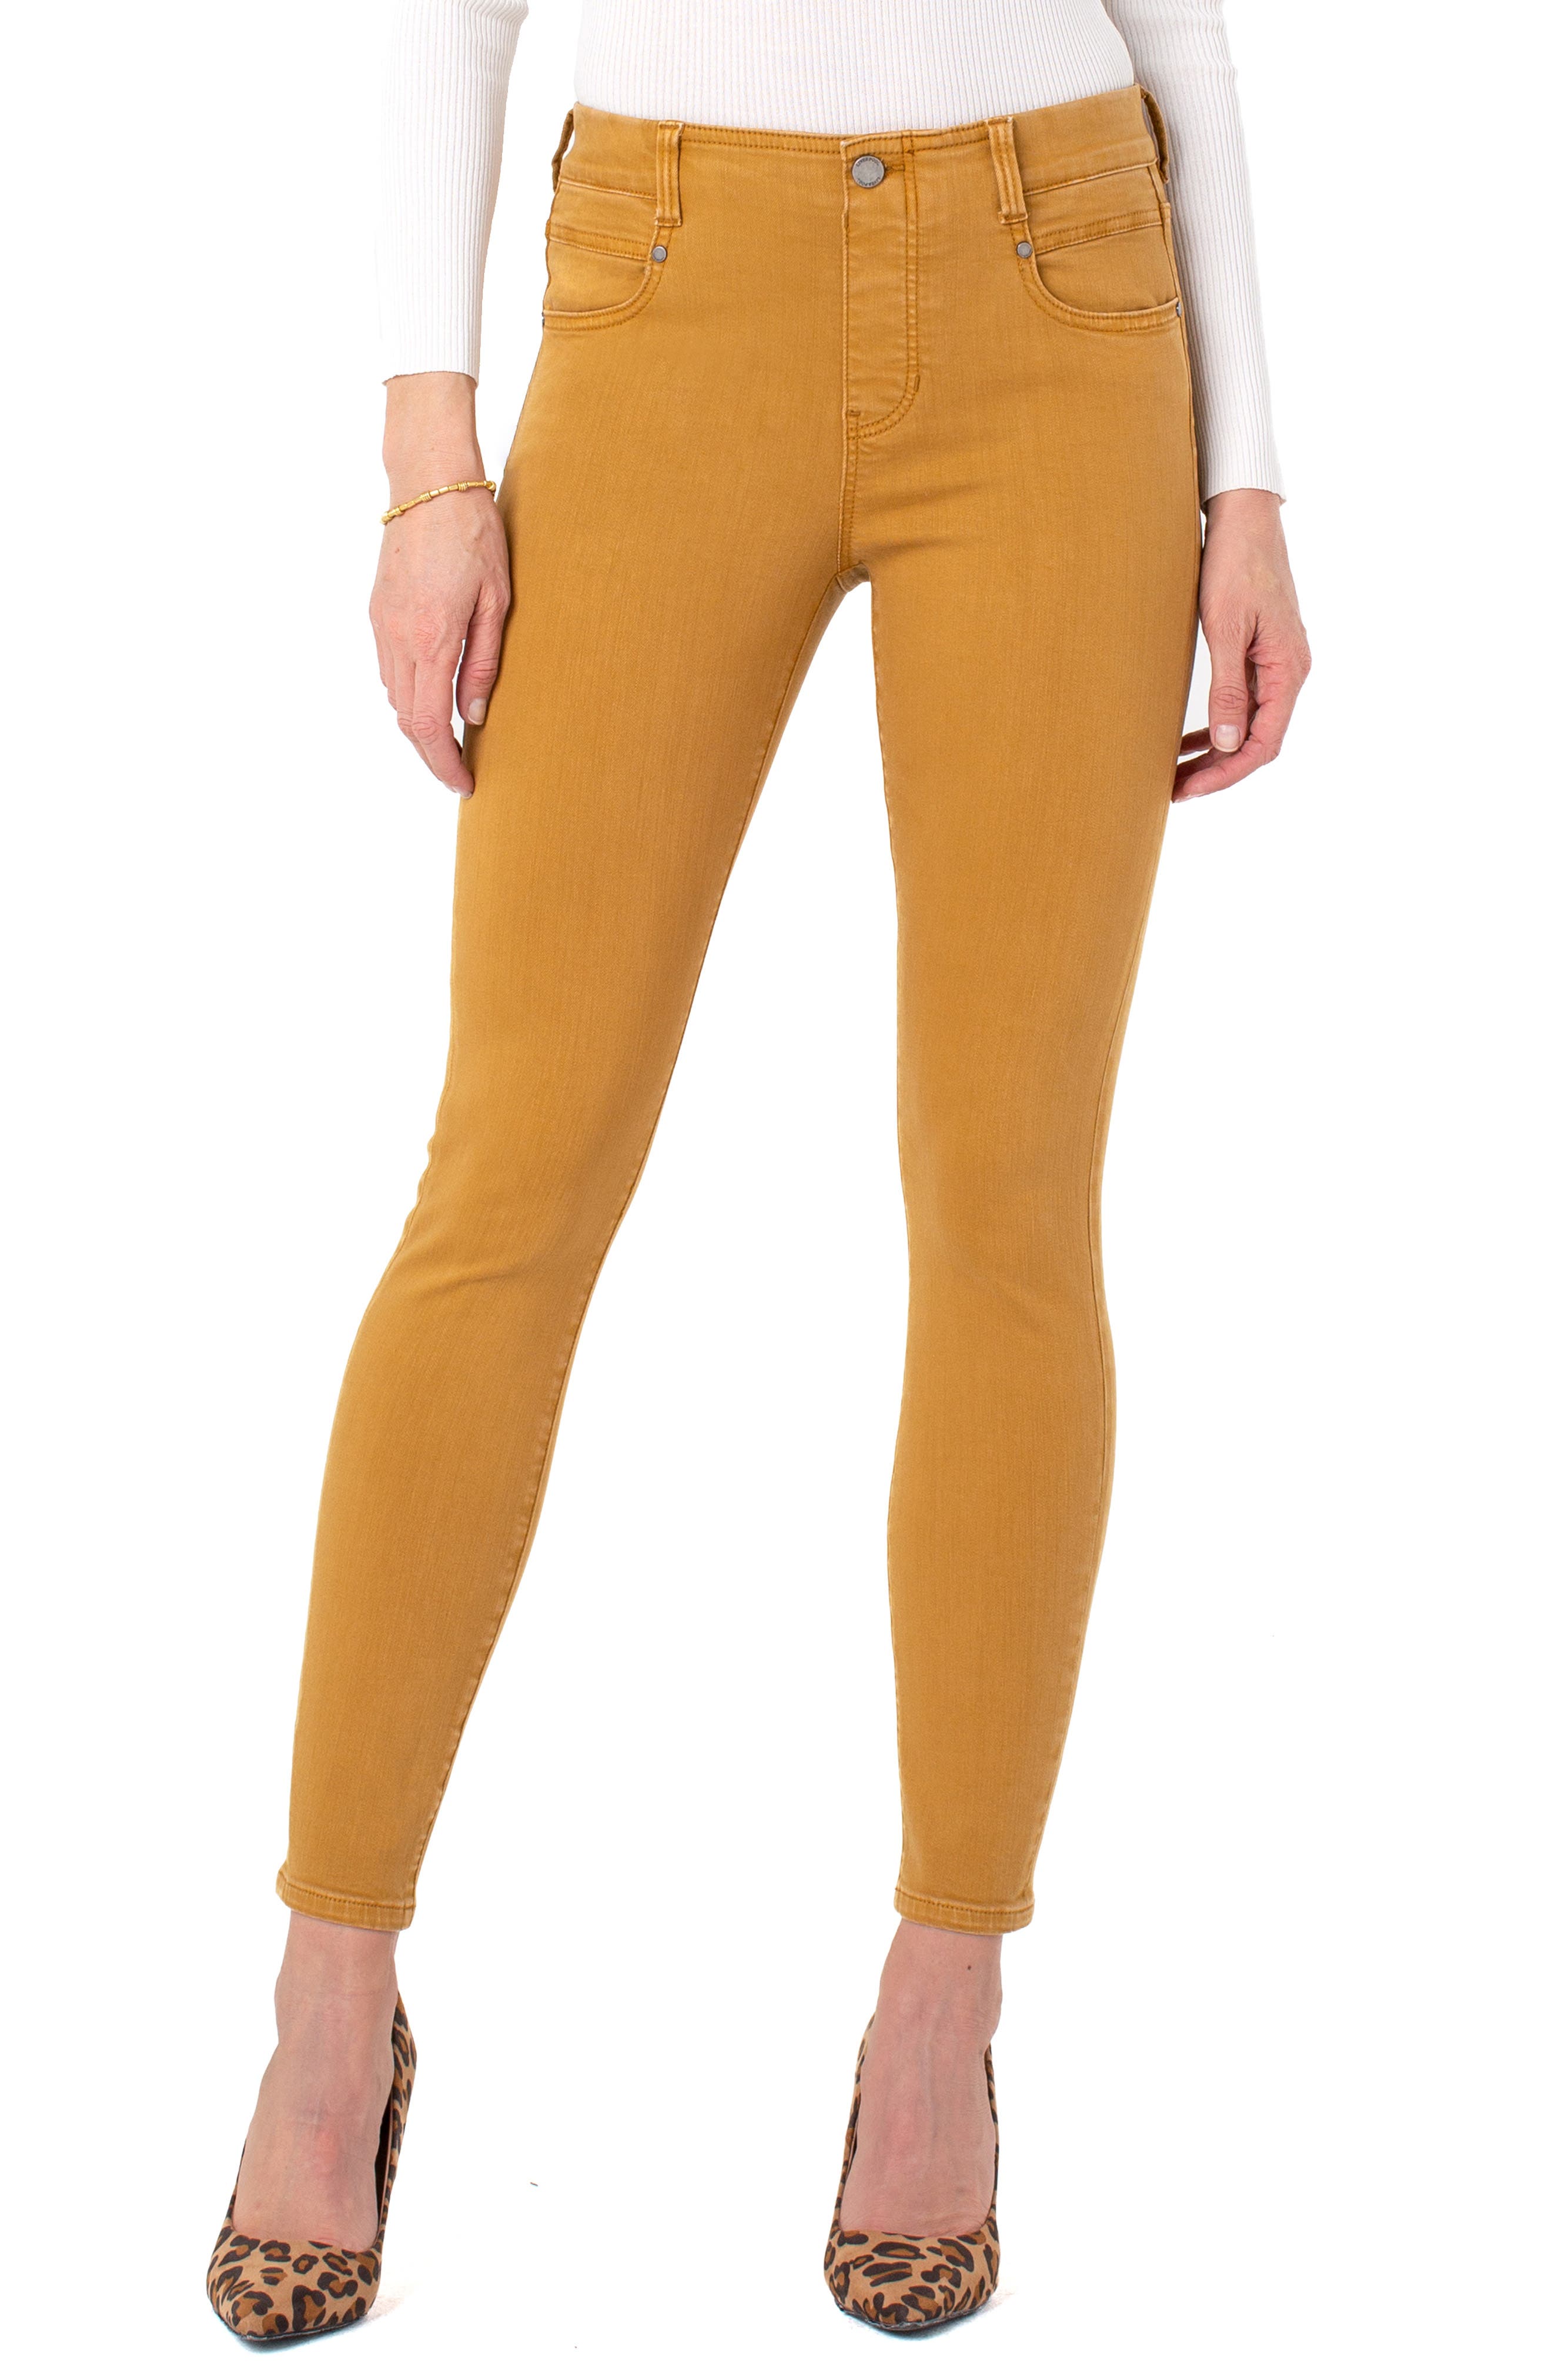 mustard colored women's jeans